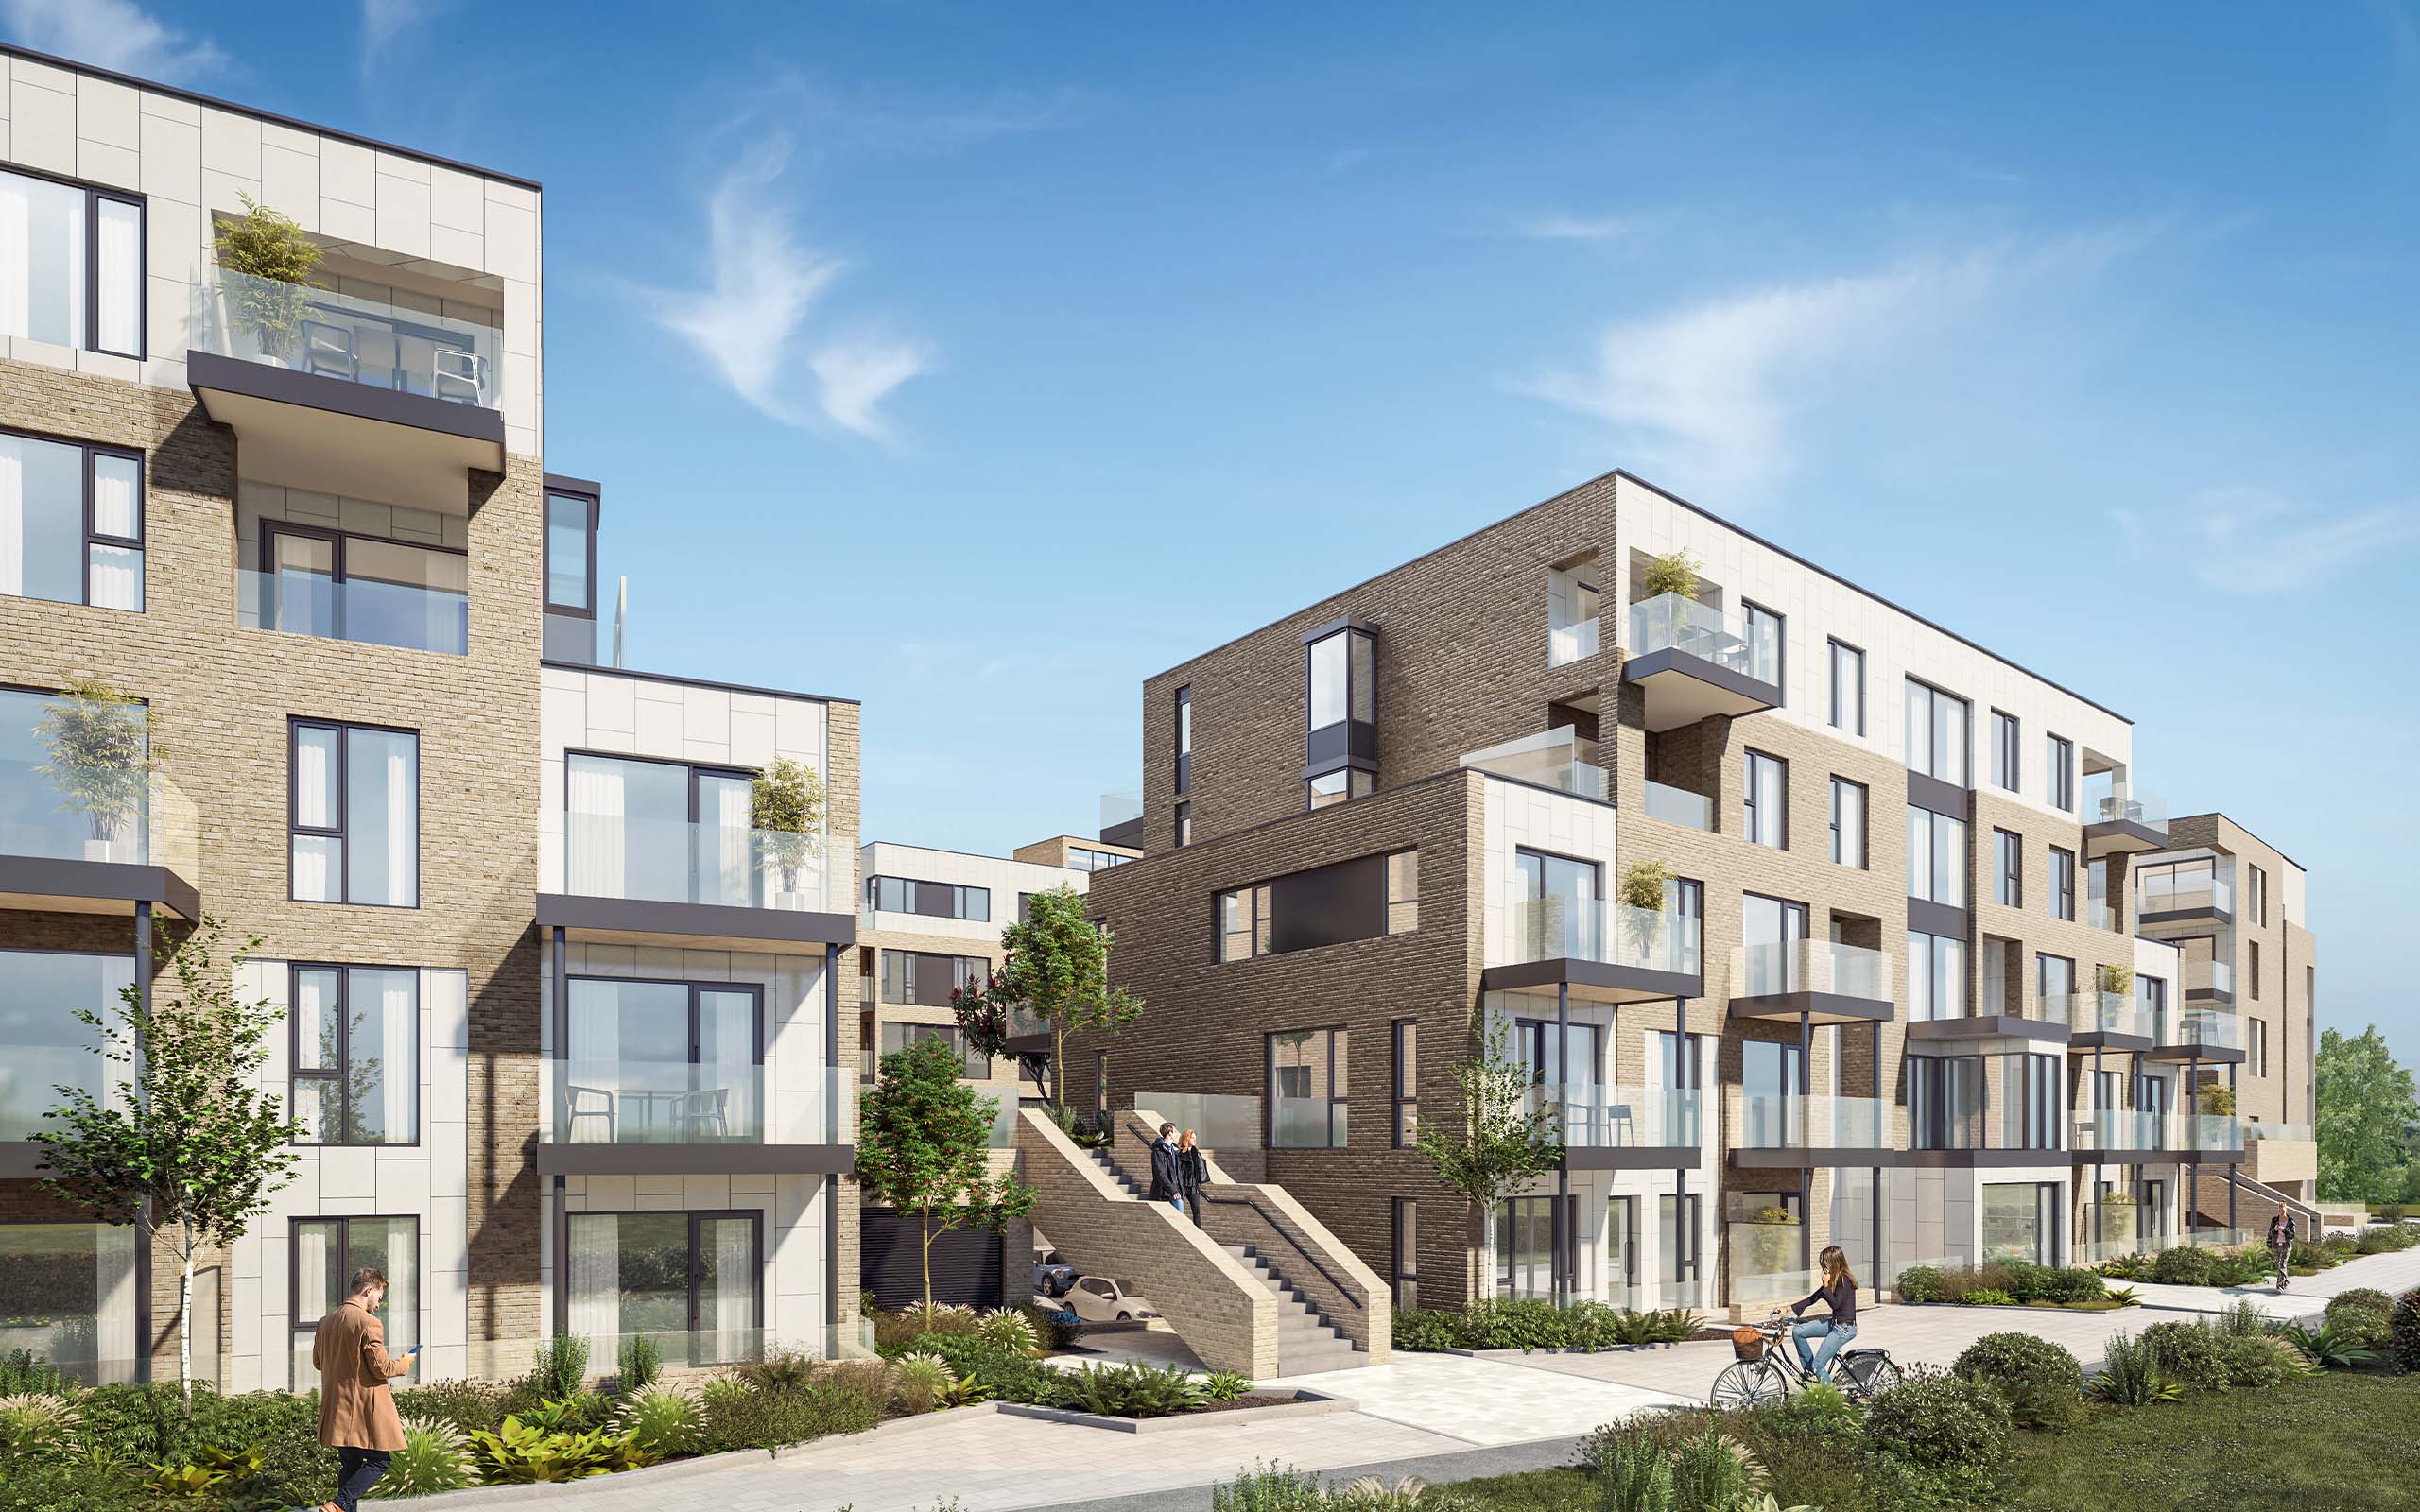 Architectural CGI of proposed Carriglea Residential Apartment Development on Naas Road, Dublin 22.